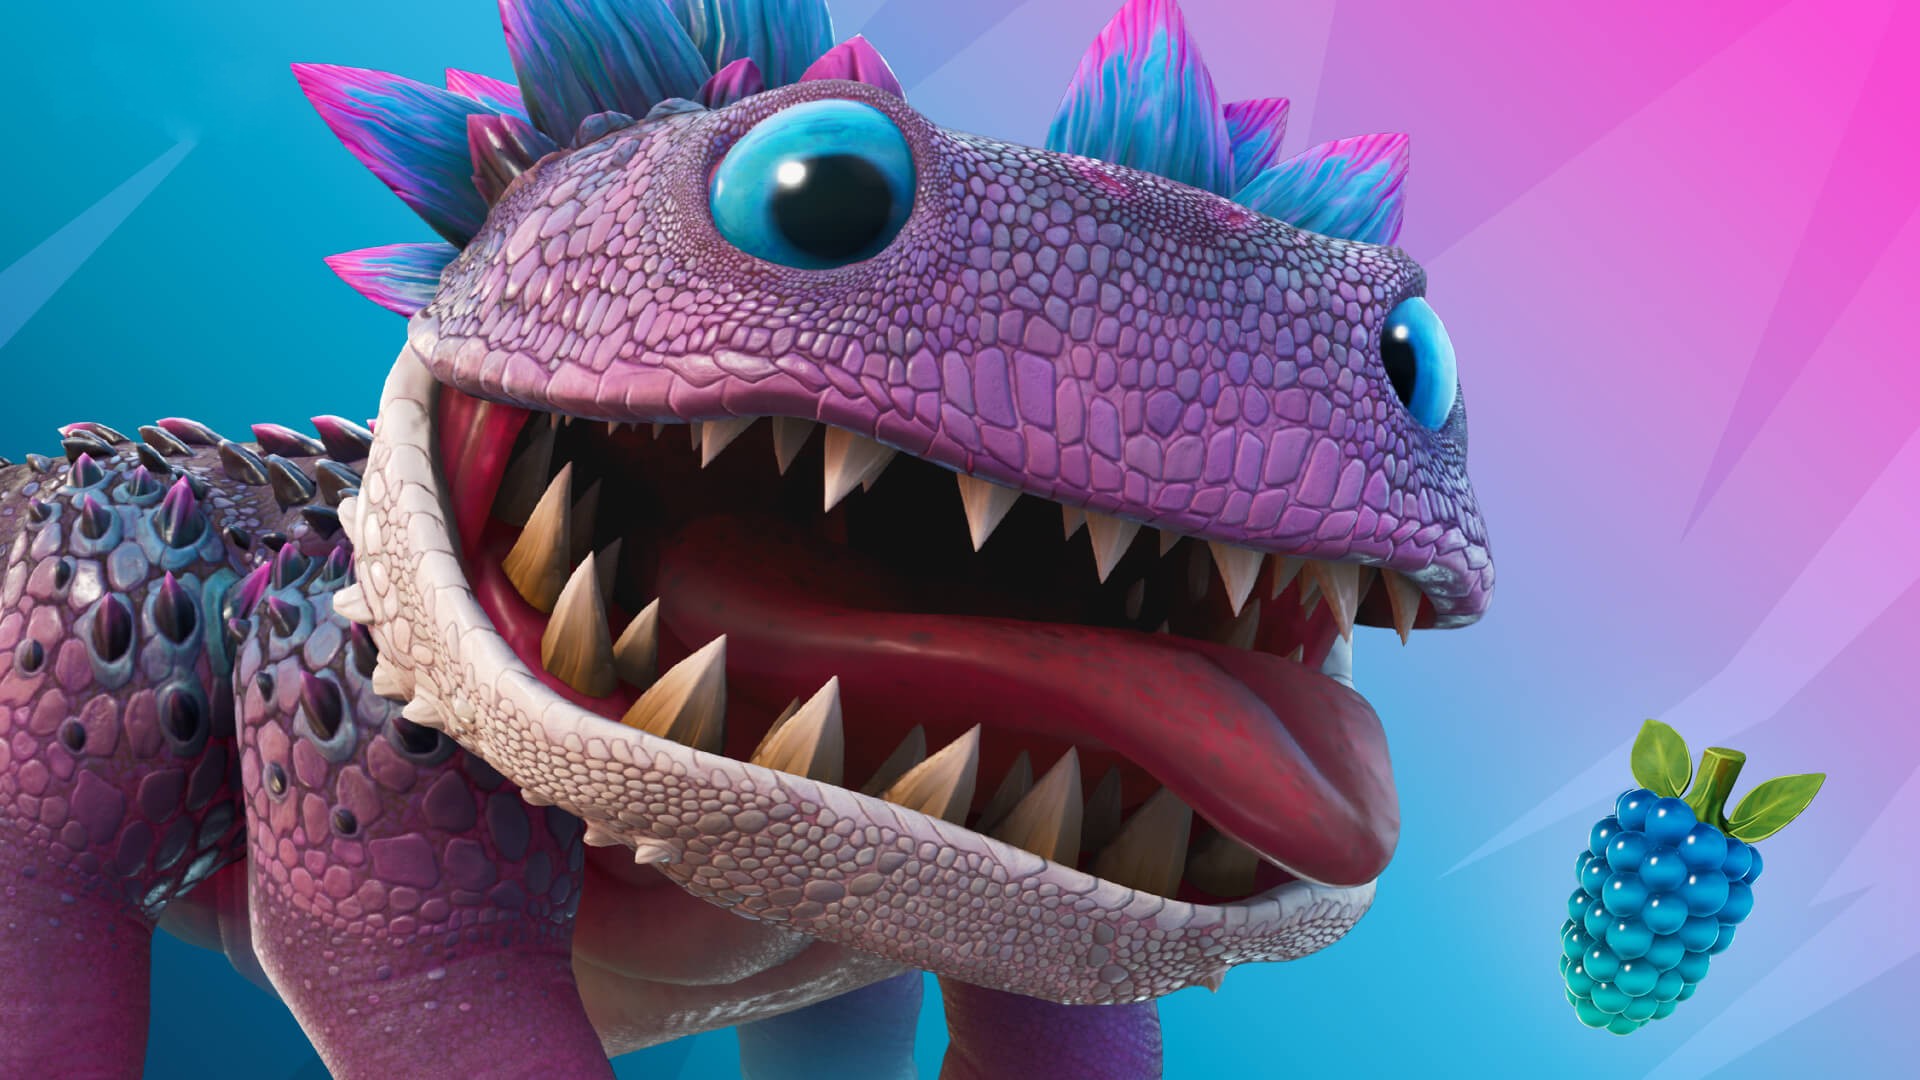  Fortnite update reintroduces Tilted Towers, dope dinosaurs 